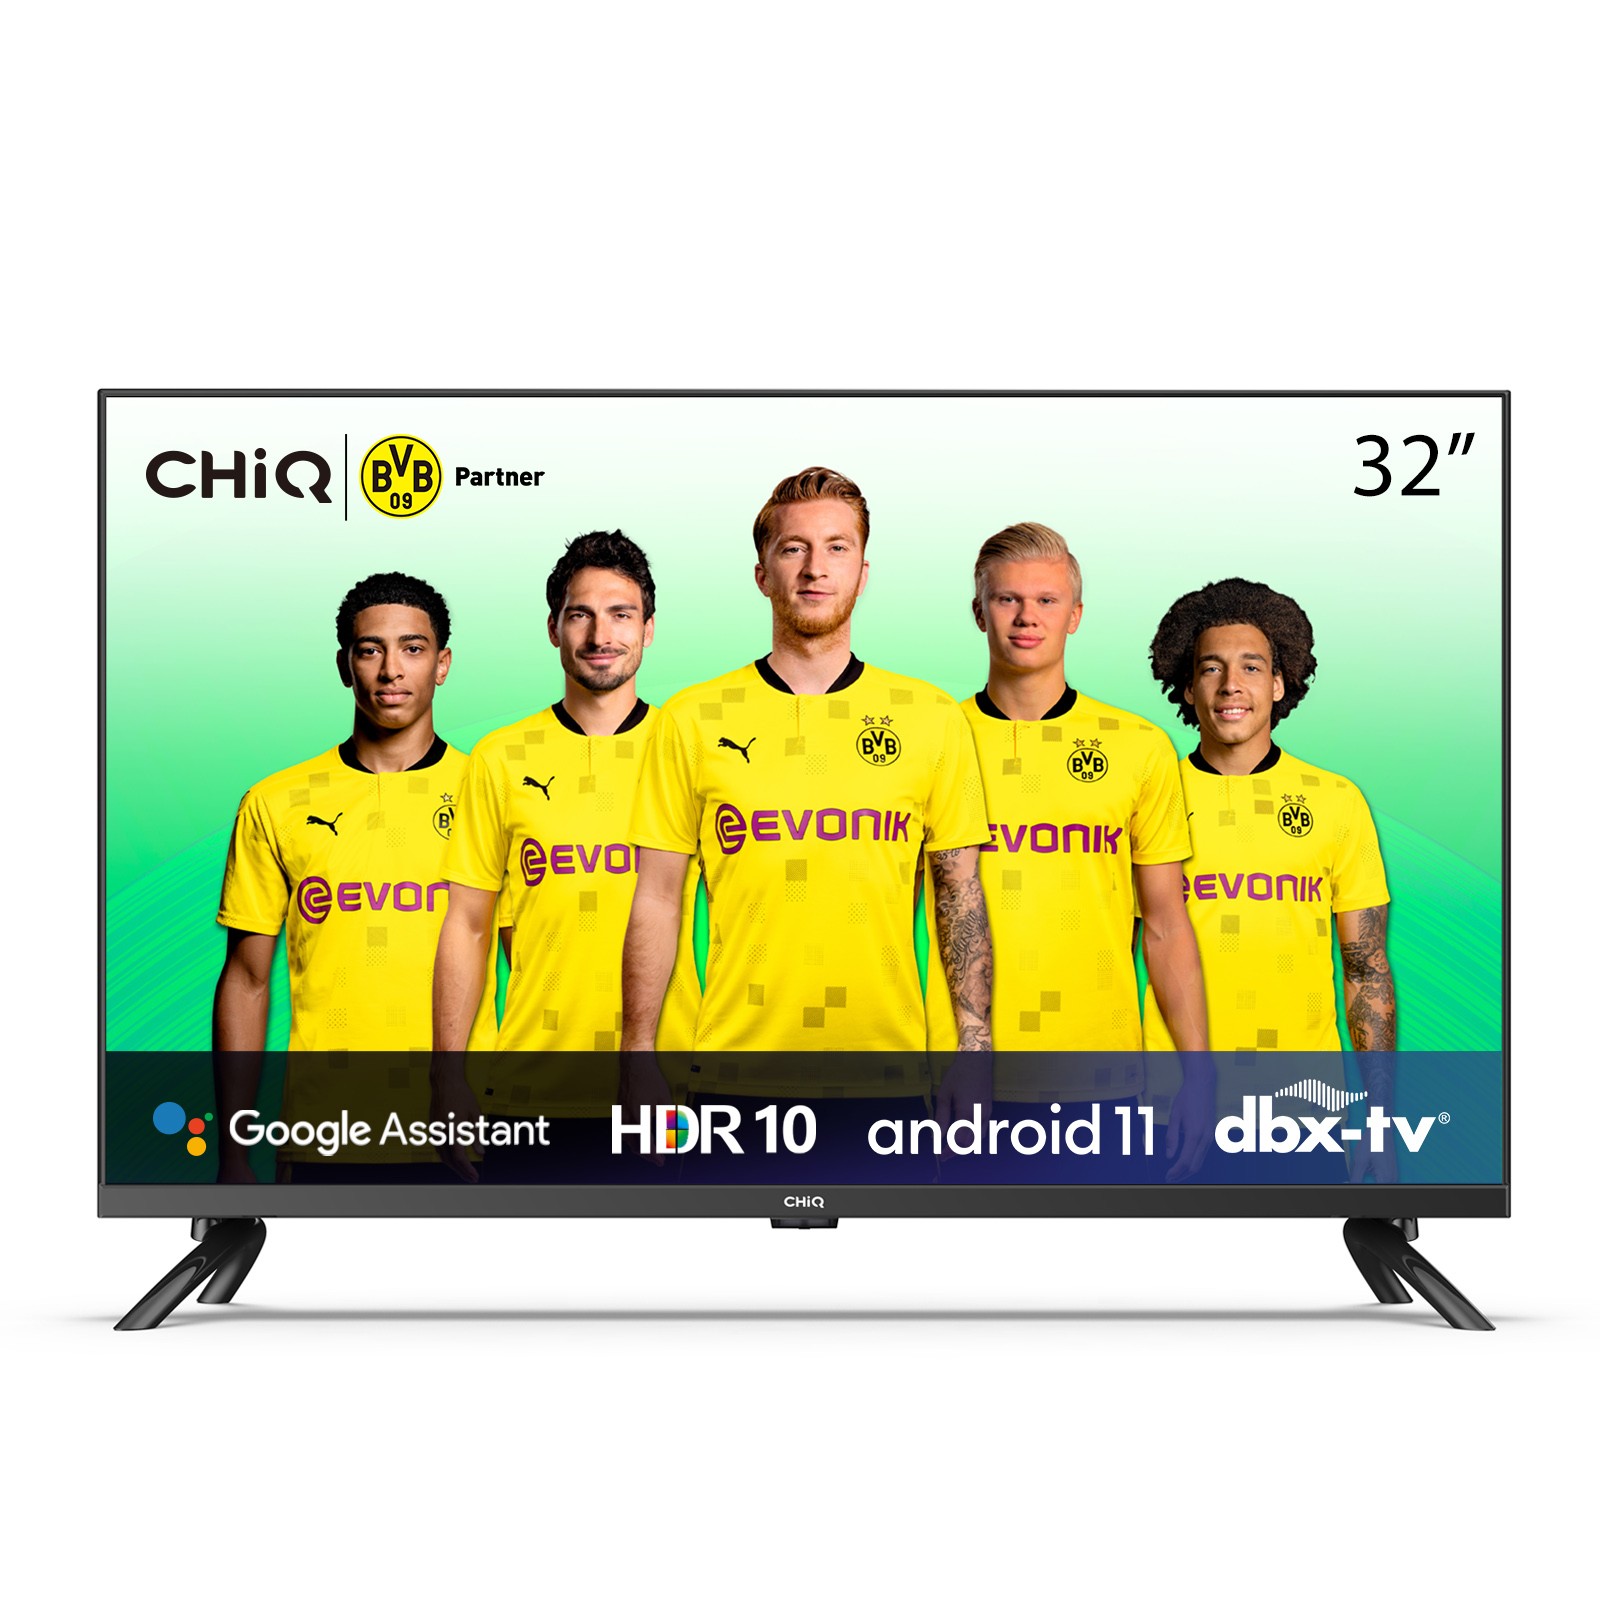 ChiQ 32" L32G7P HD Android Smart Tv